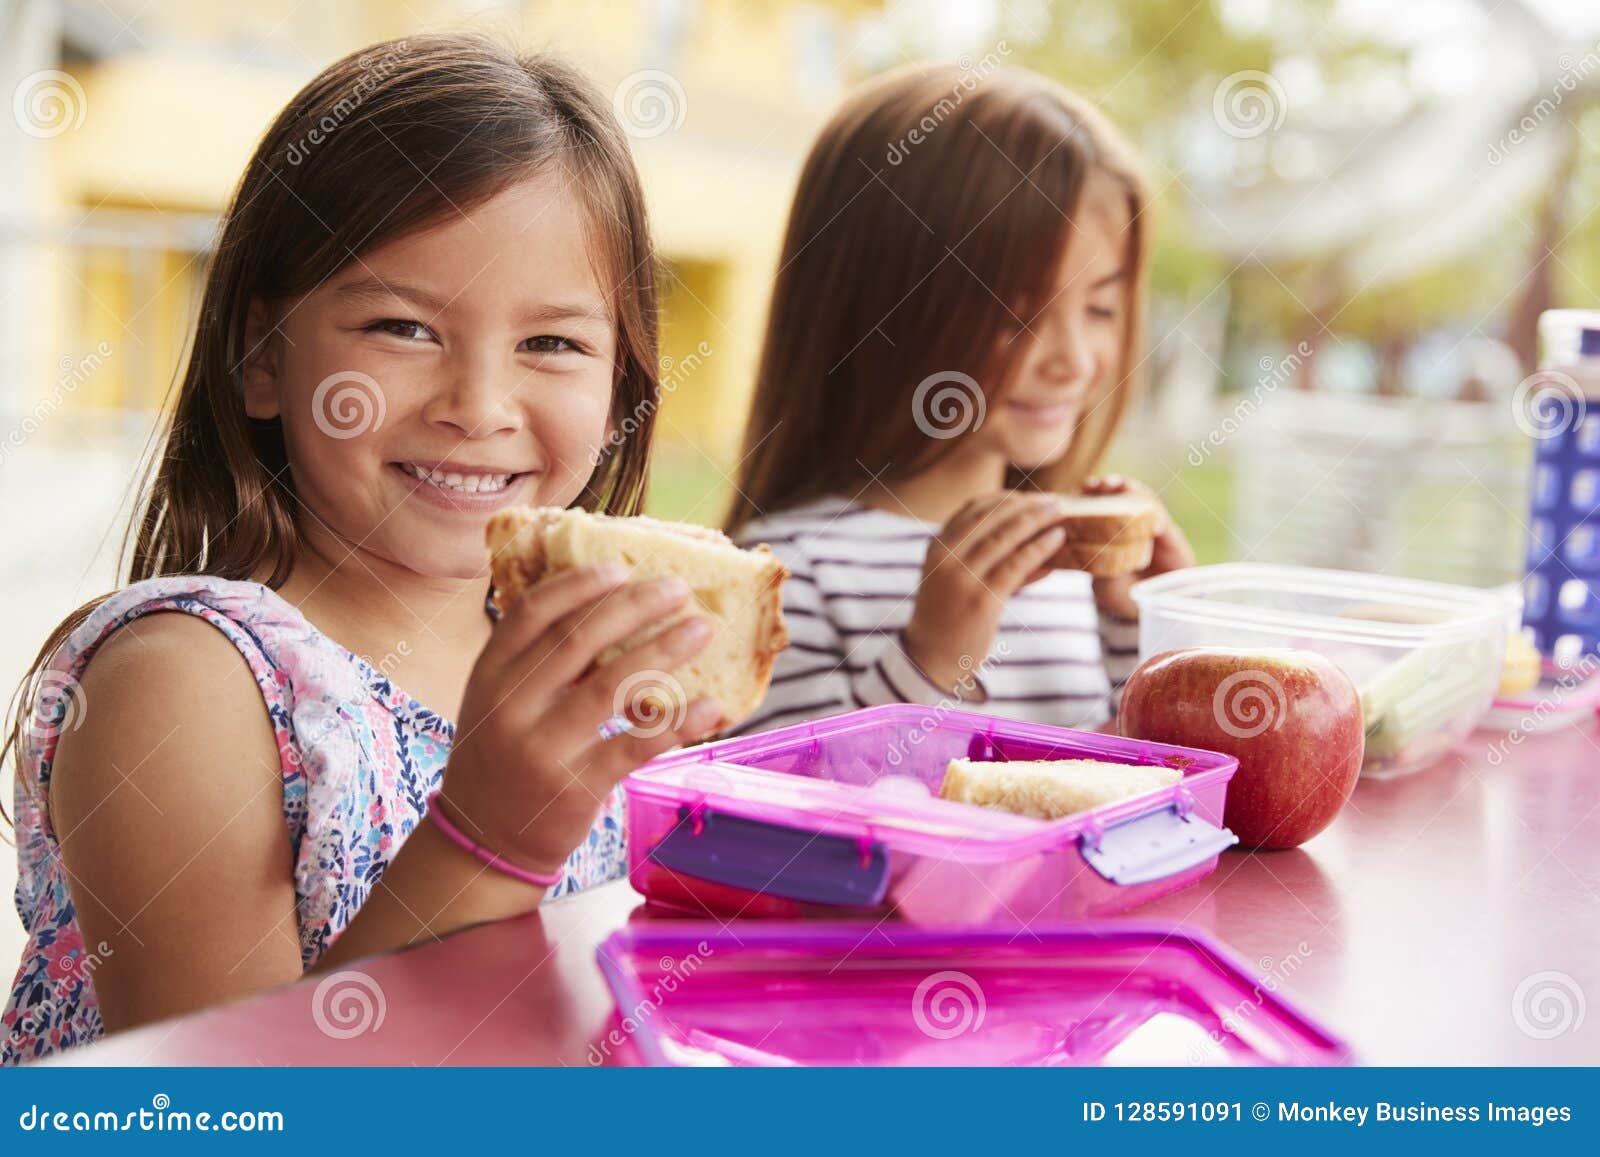 young schoolgirls holding sandwiches at school lunch table